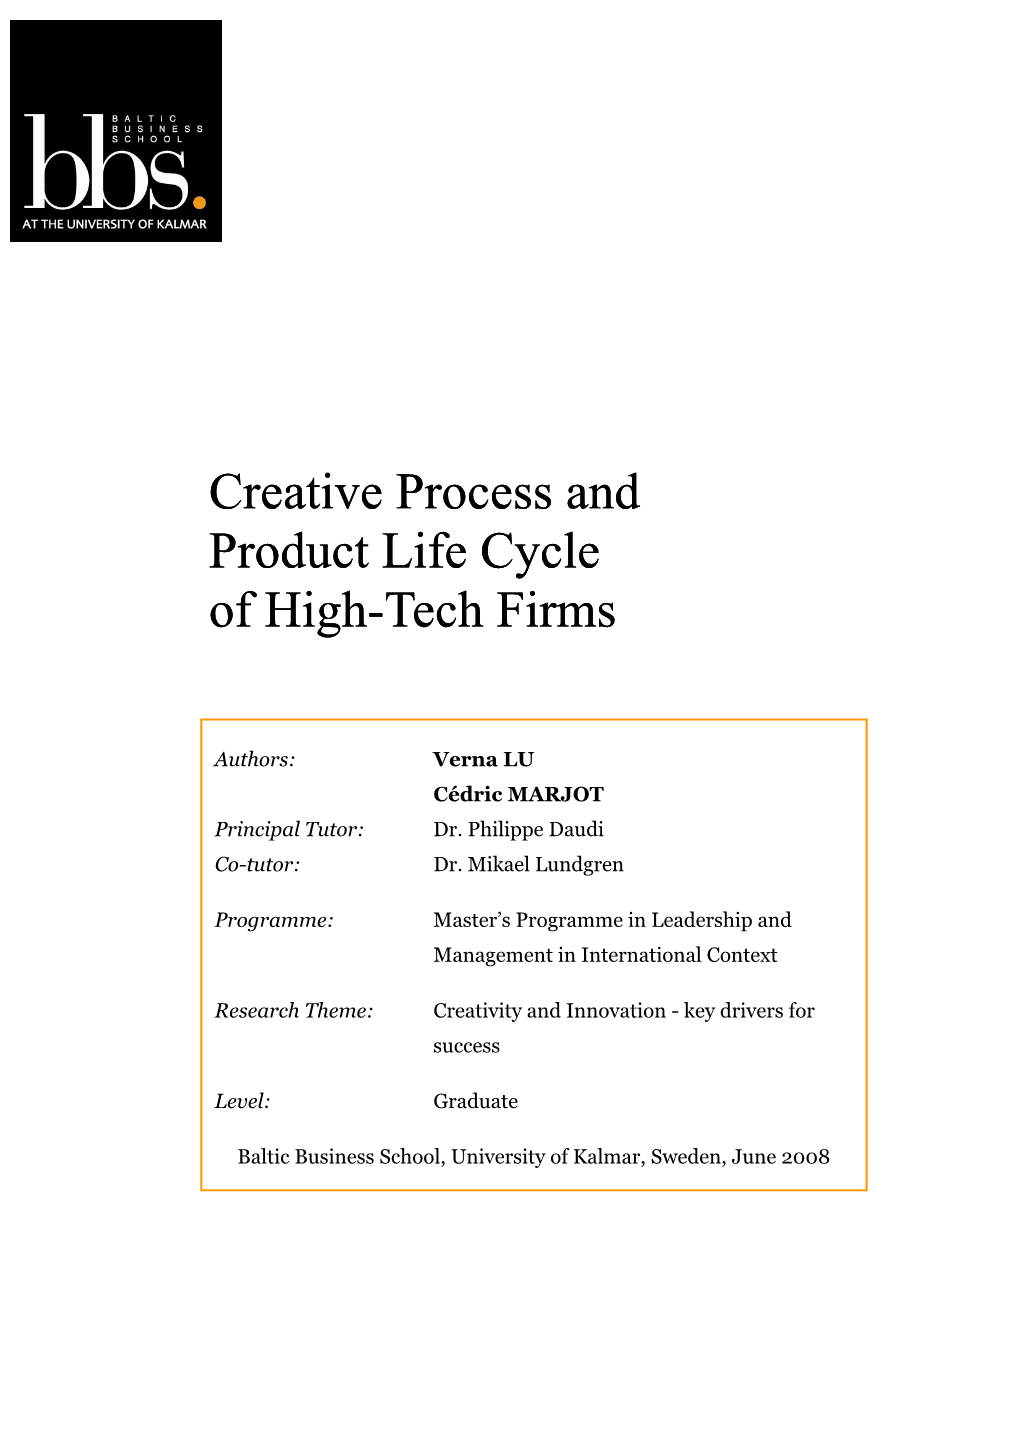 Creative Process and Product Life Cycle of High-Tech Firms